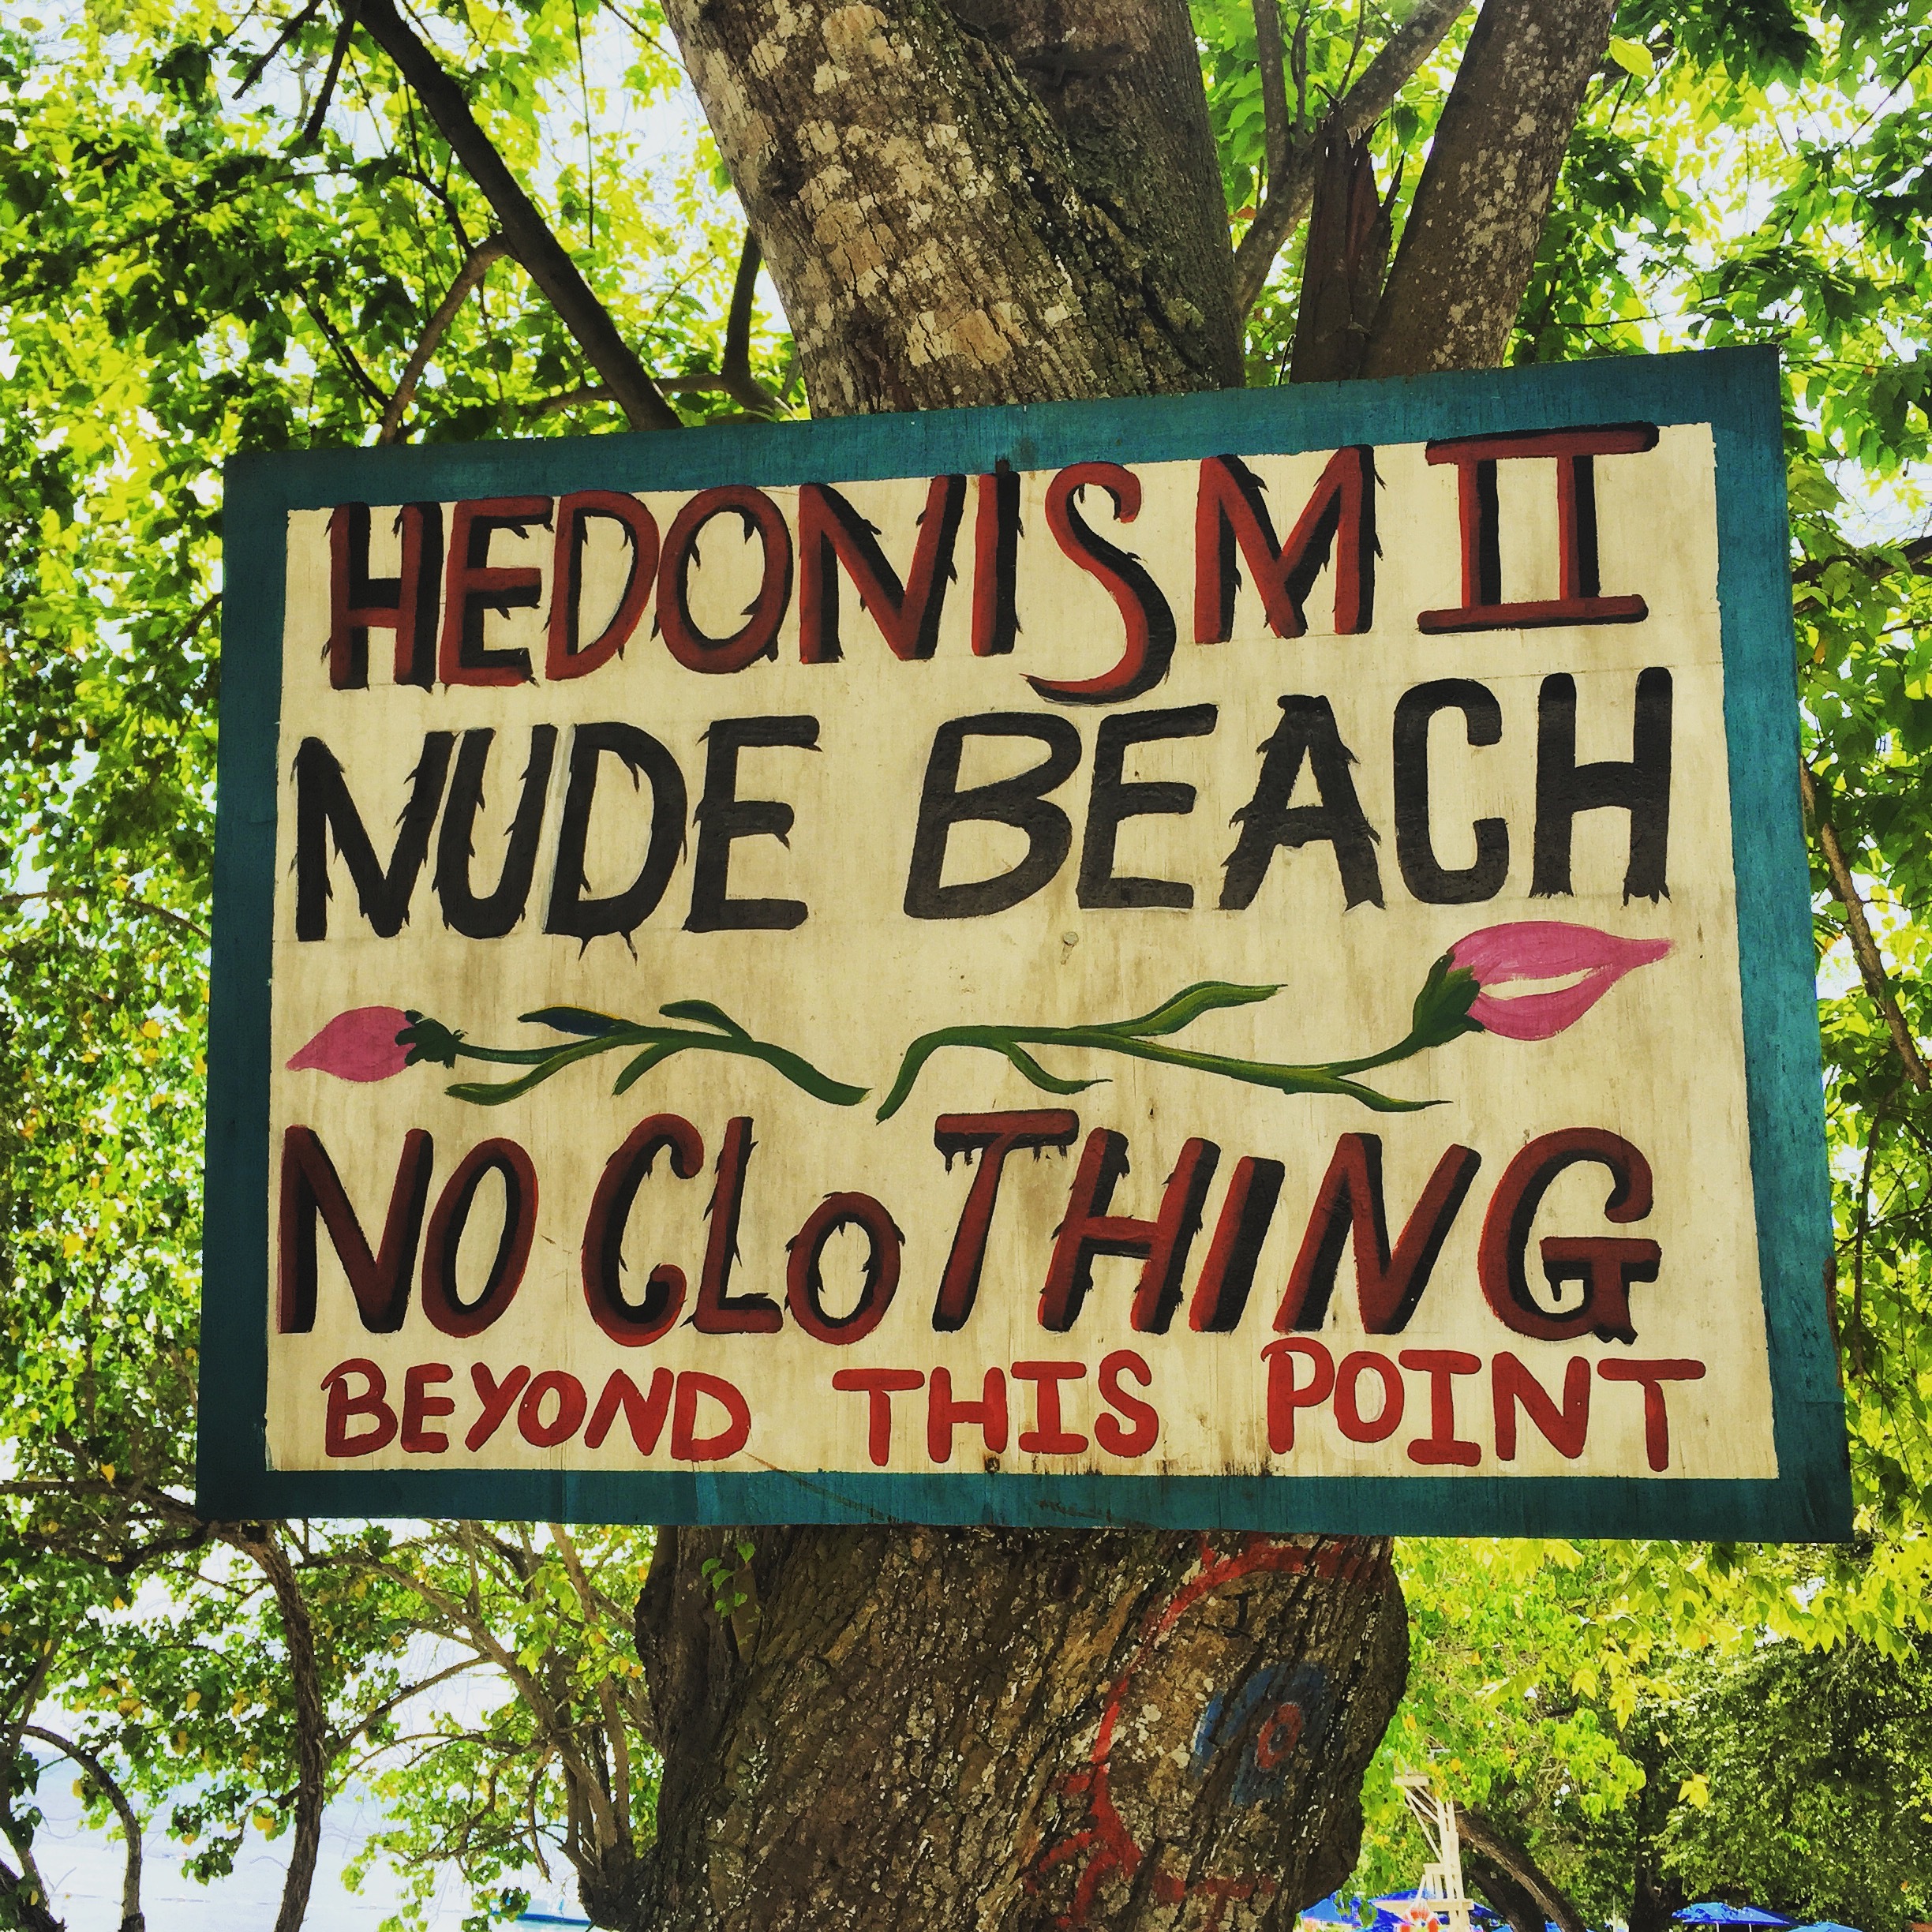 Some chicks are just that good on a nudist beach